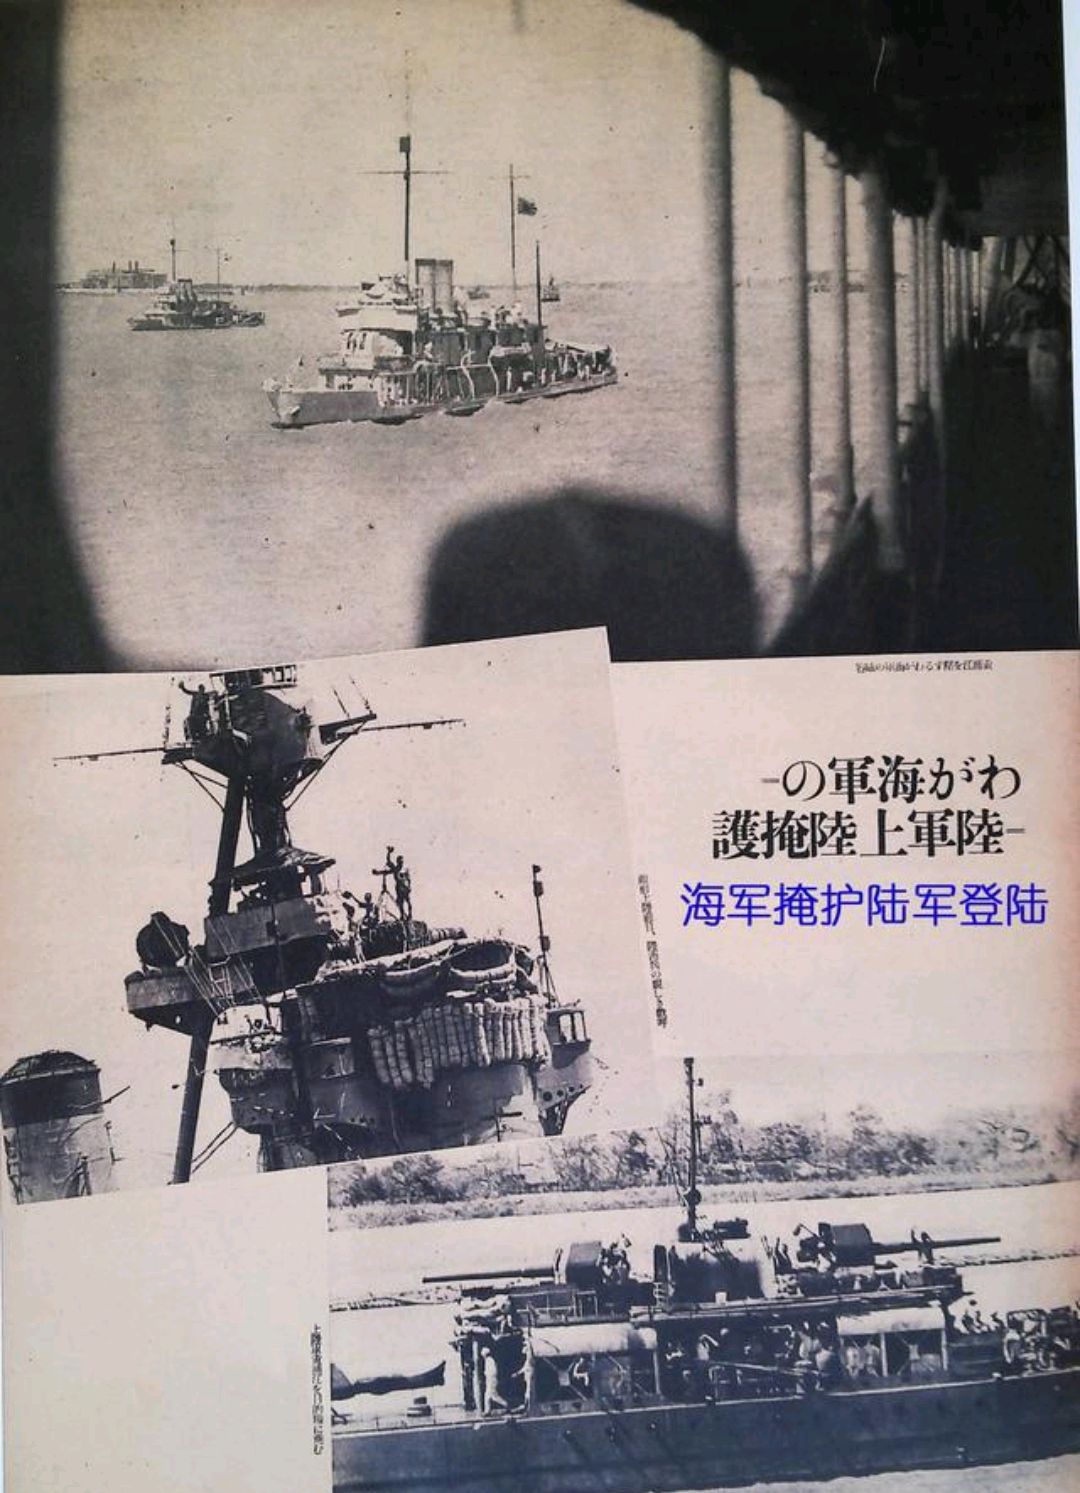 The Japanese army made a surprise attack on Wusong with only more than ...